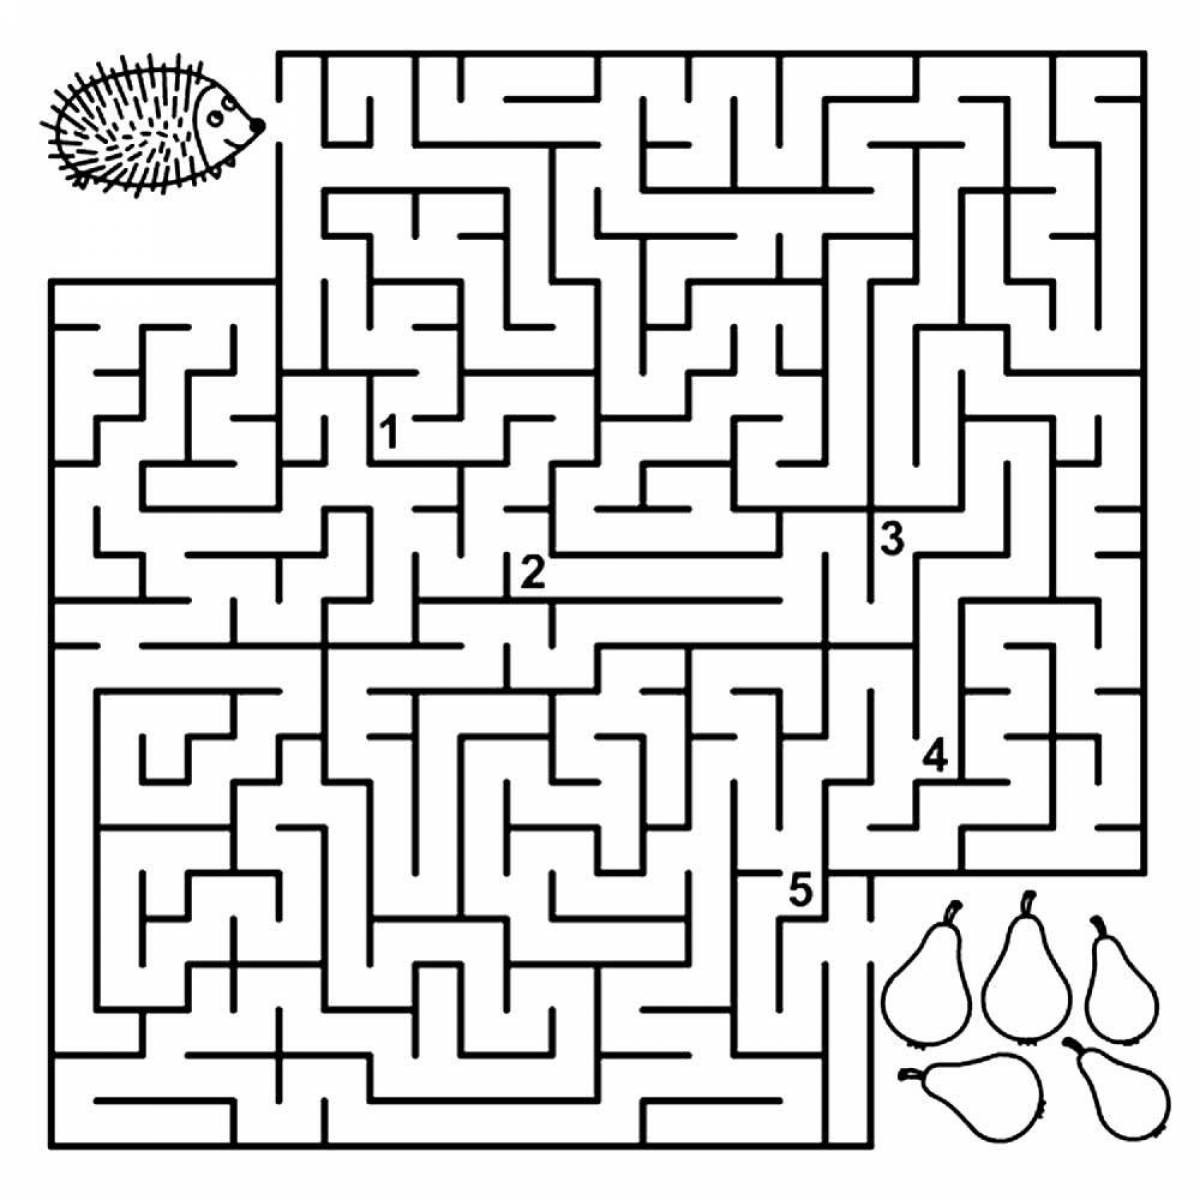 Charming maze coloring book